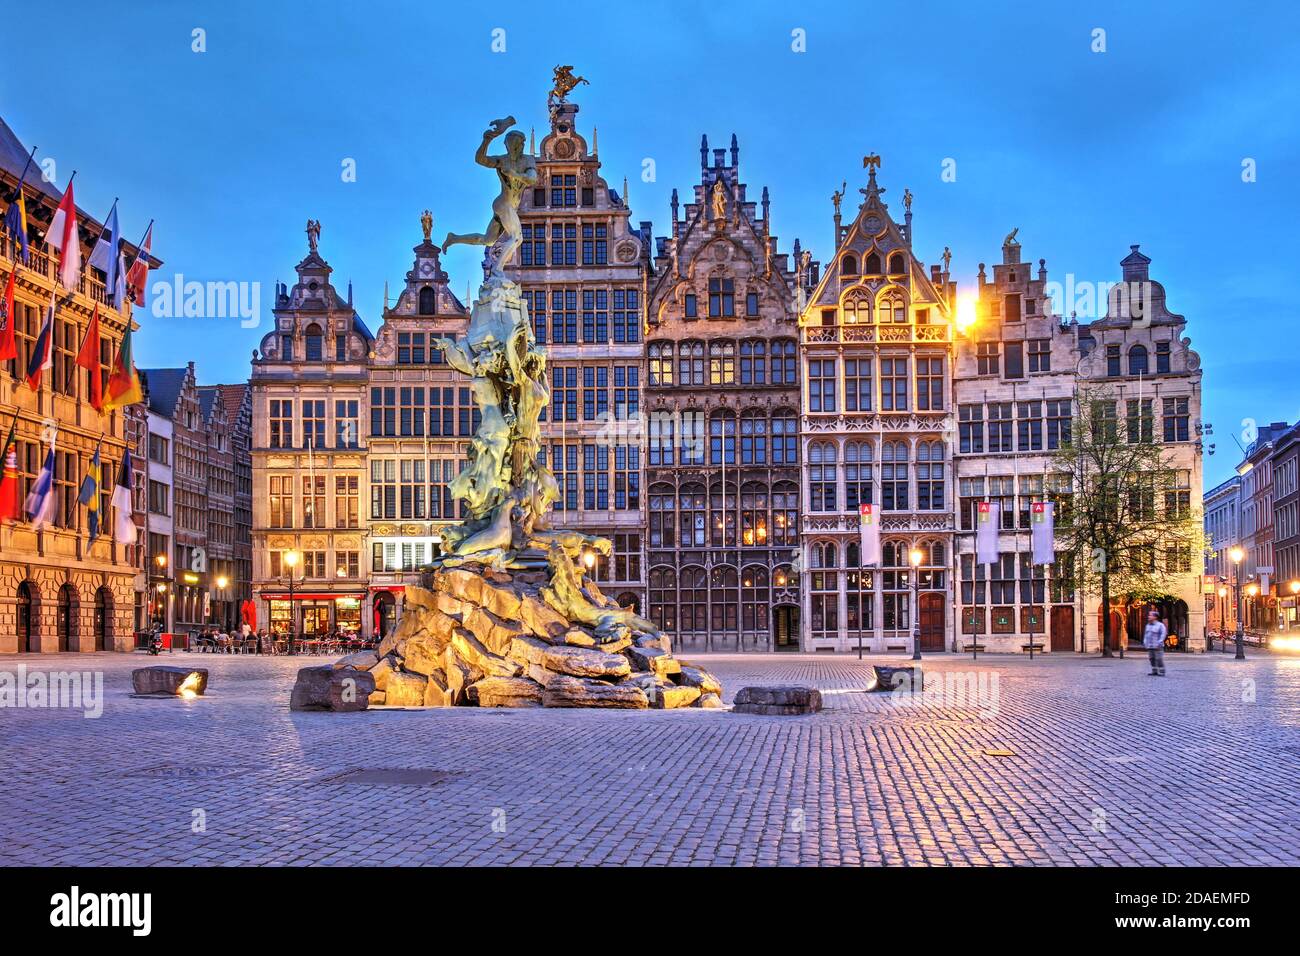 A series of 16th century Guildhalls in Grote Markt (Big Market Square) in the old town of Antwerp, Belgium at twilight. Stock Photo